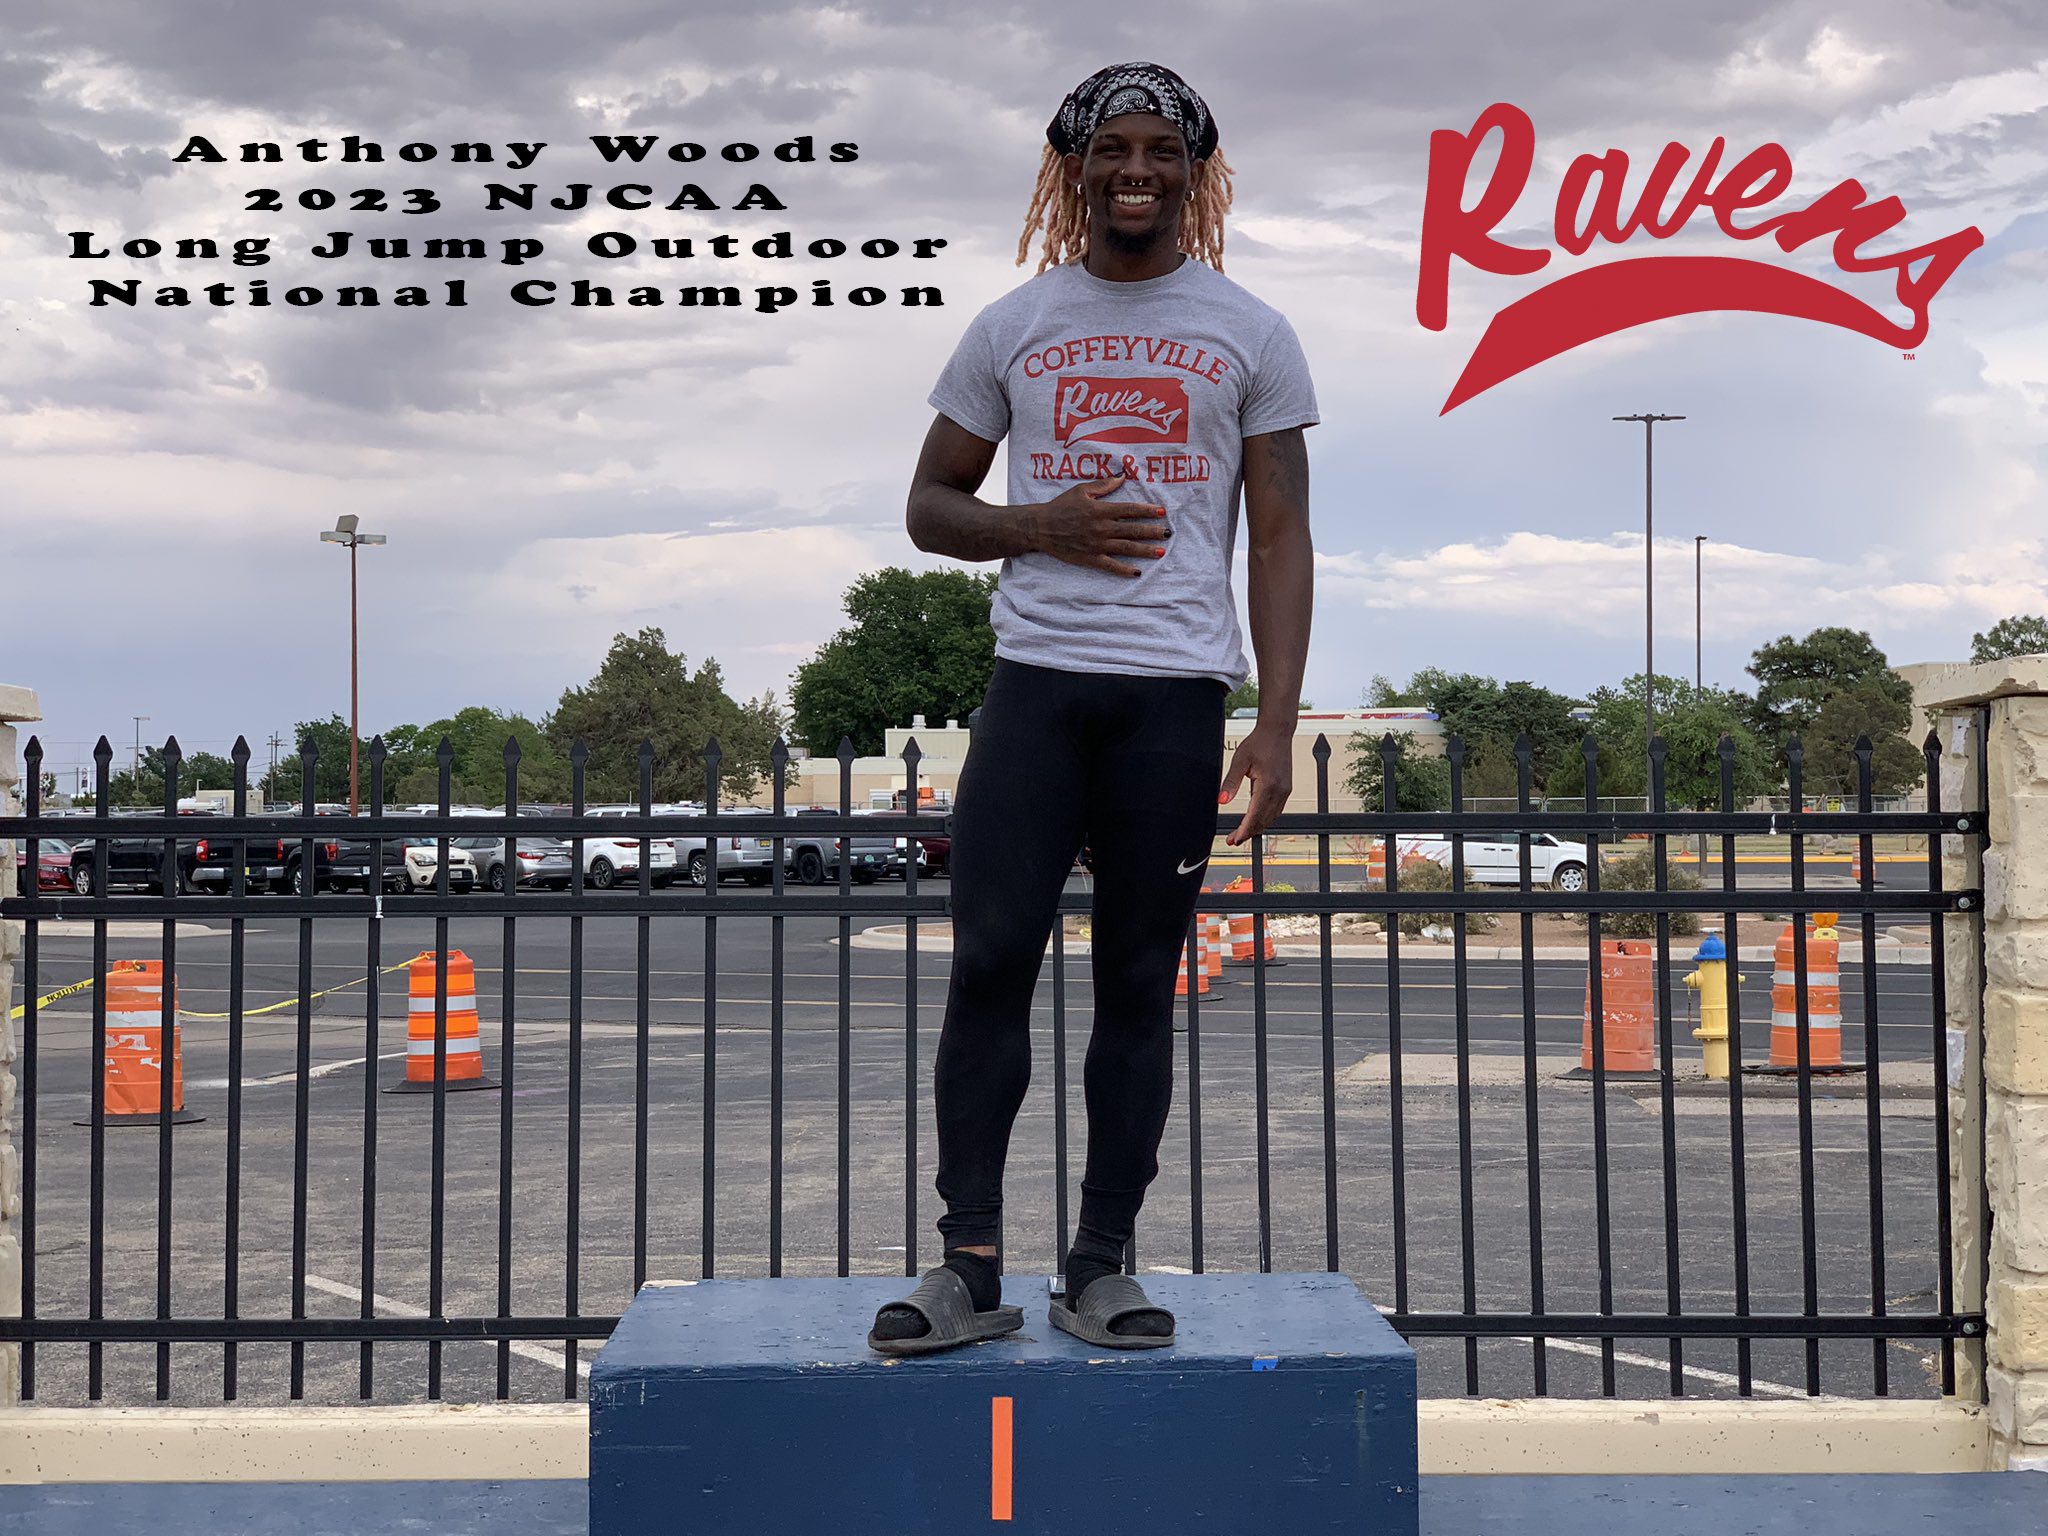 Red Raven Men's Track place 10th, Women 29th at NJCAA Outdoor Nationals.  Anthony Woods Wins Long Jump National TItle